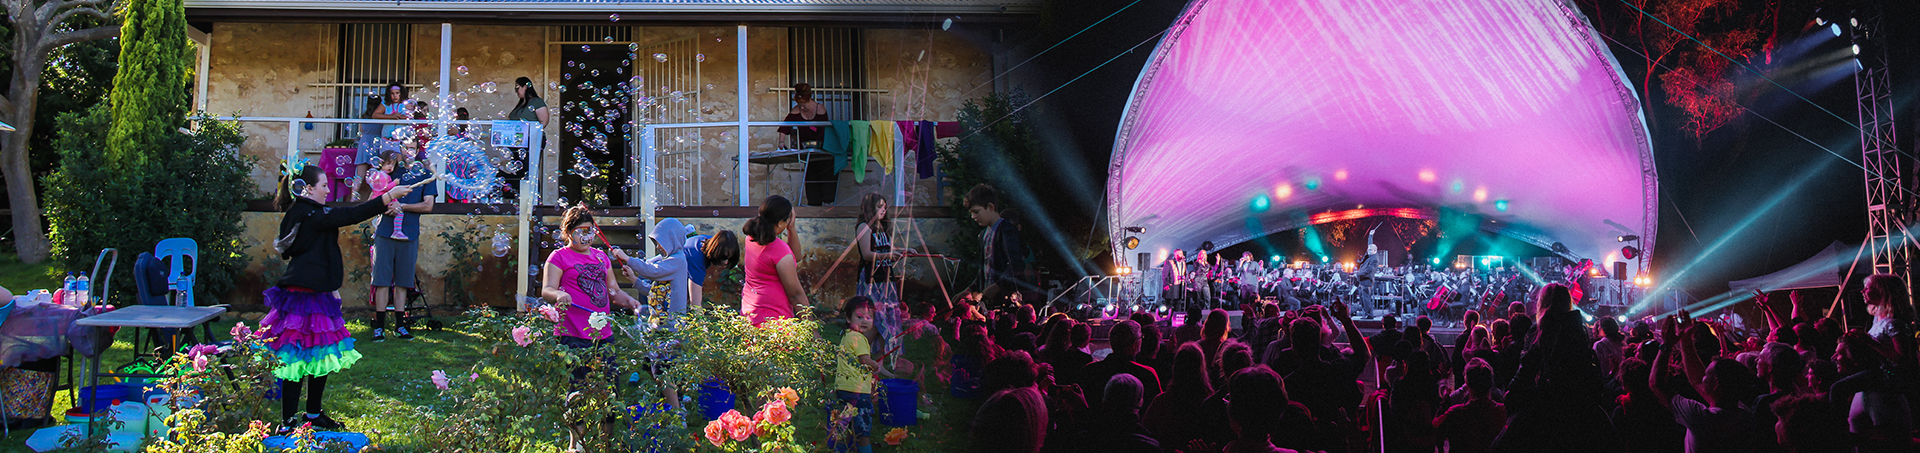 An image of children's activities, including blowing bubbles, blends into a concert.